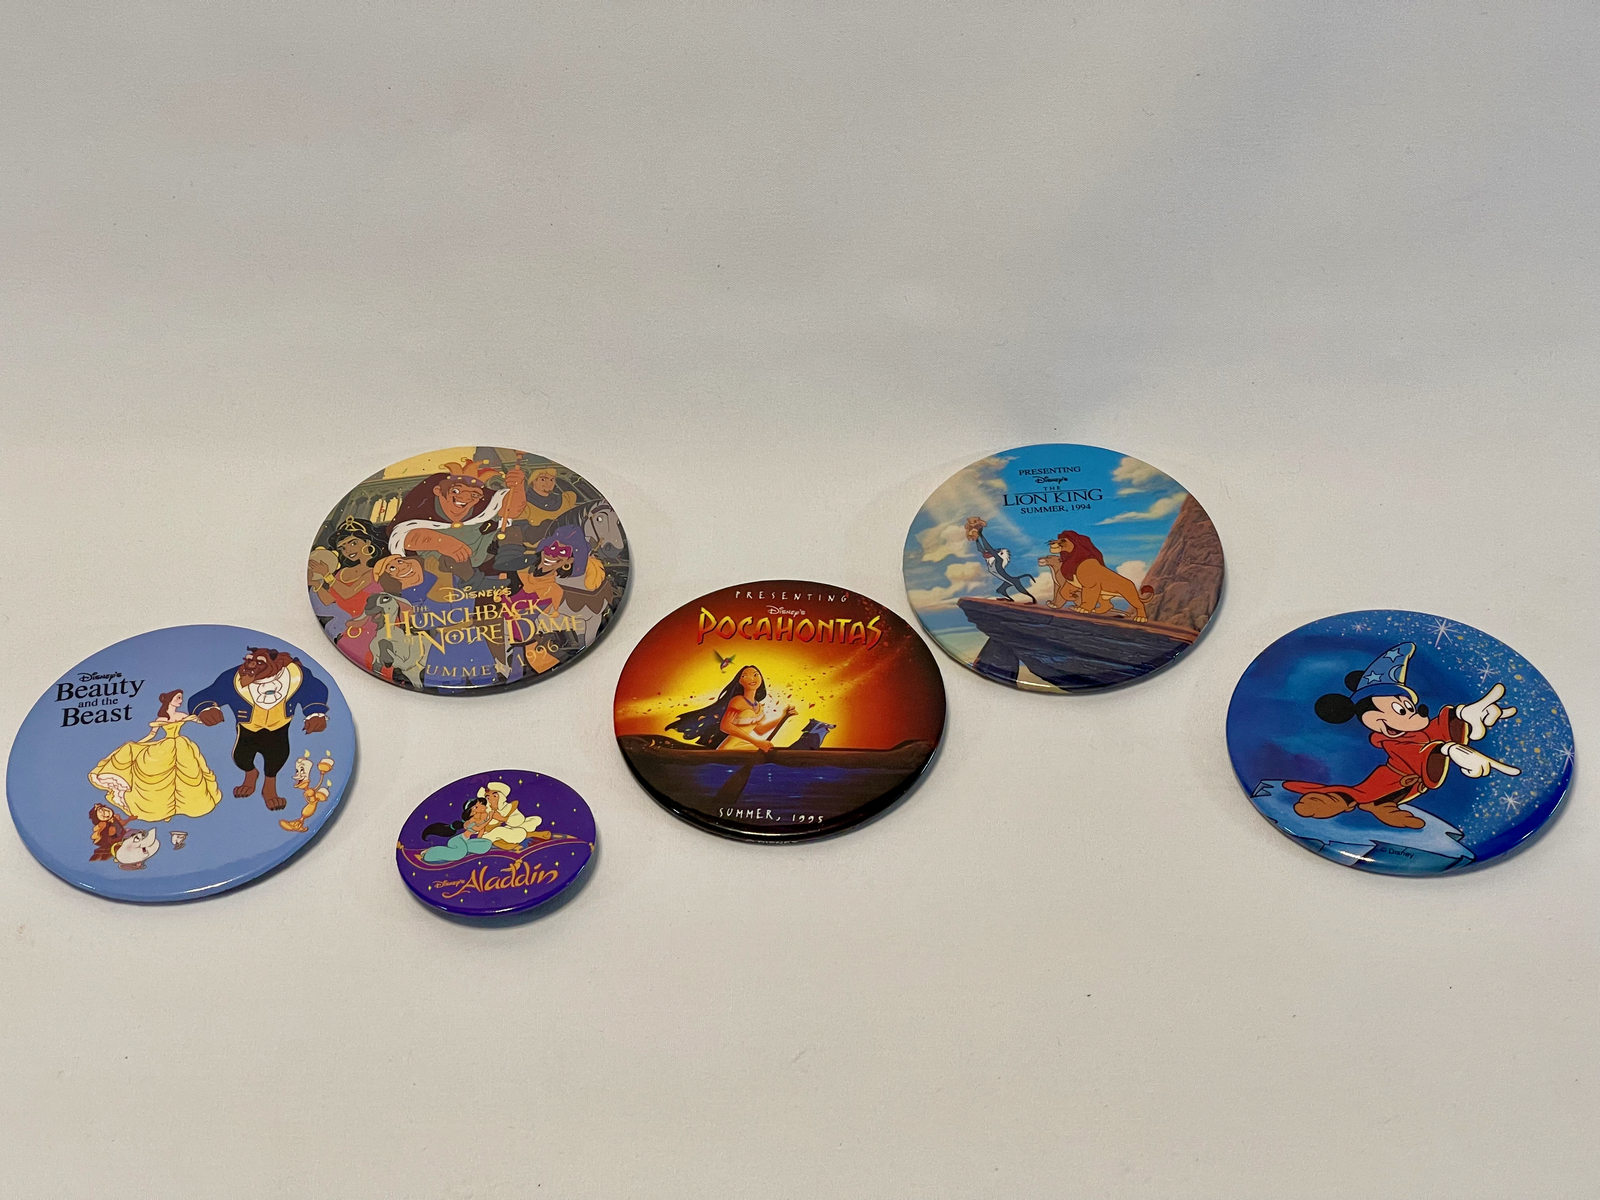 Primary image for The Disney Store Cast Member Buttons - Commemorative Movie Buttons (Coll. of 6)